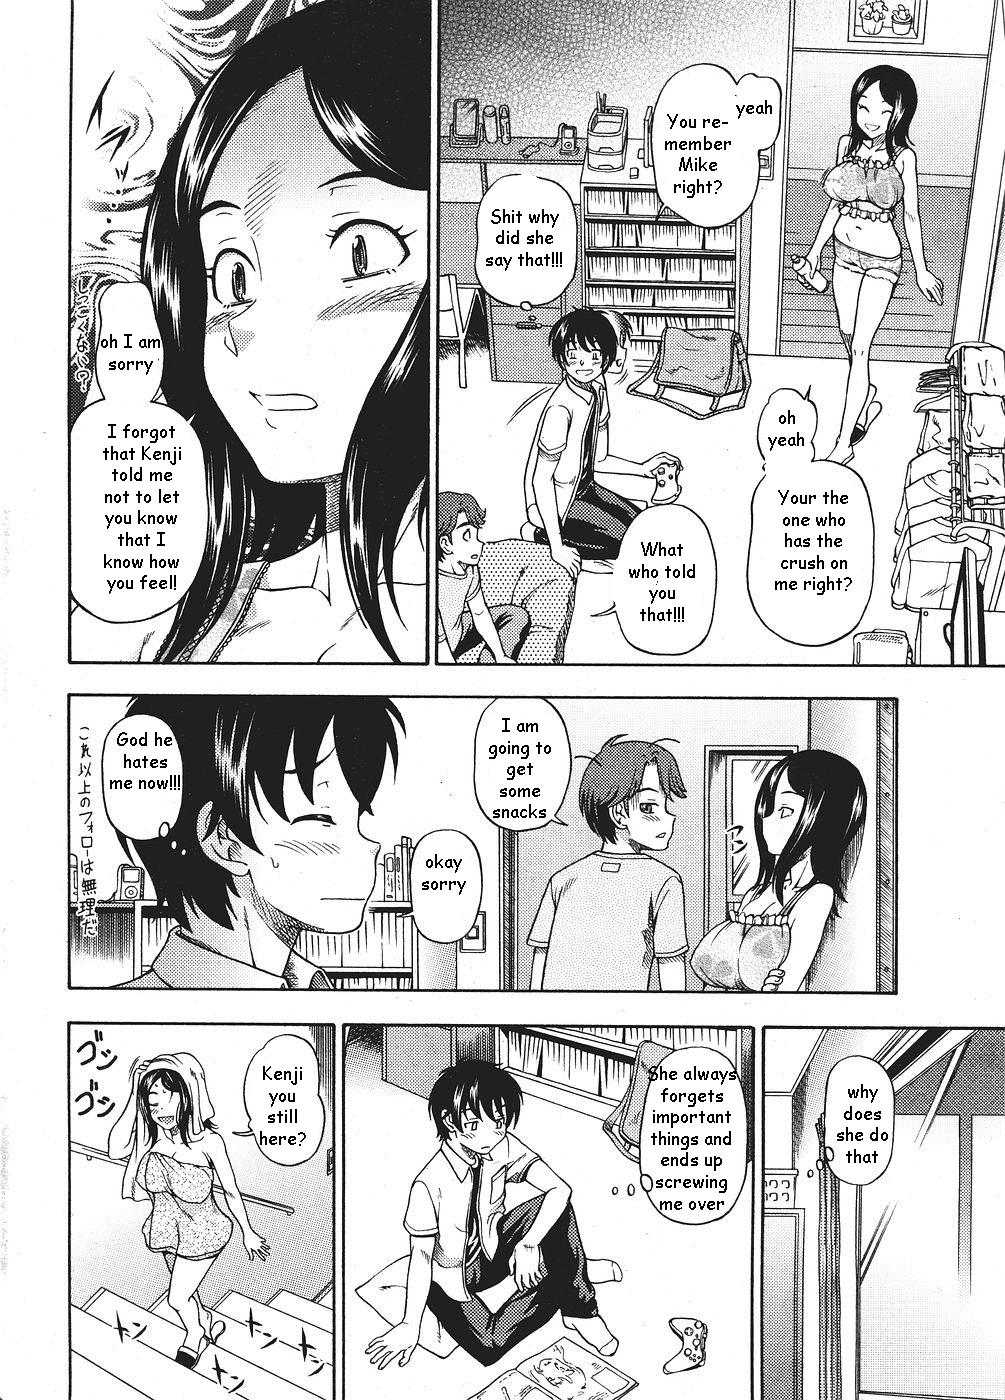 Screaming Sister Rebound Hotel - Page 2